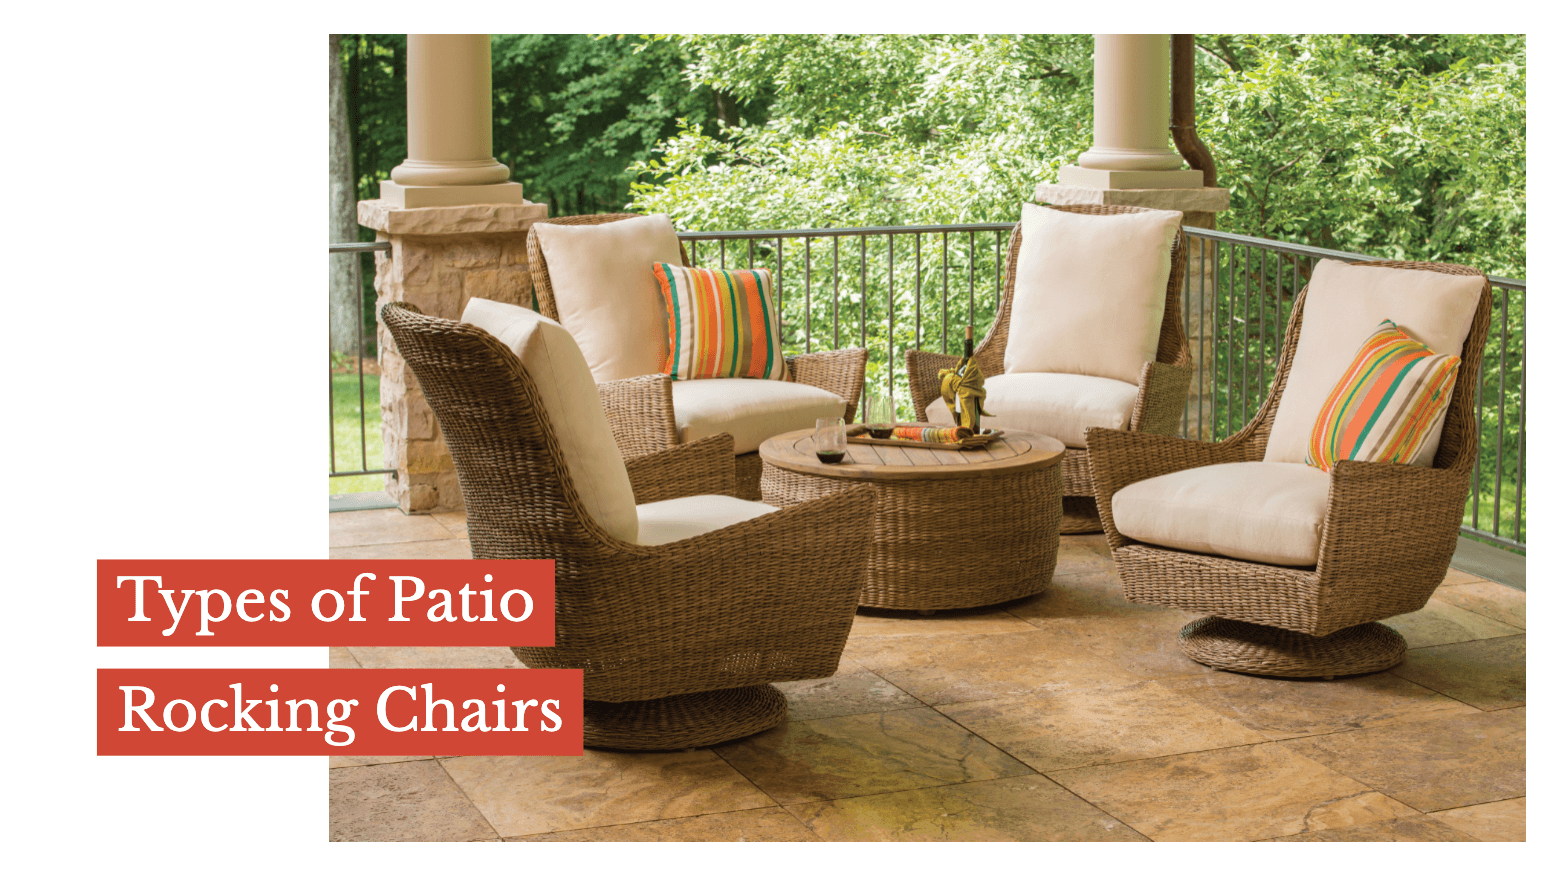 Types of Patio Rocking Chairs – Sunniland Patio - Patio Furniture in